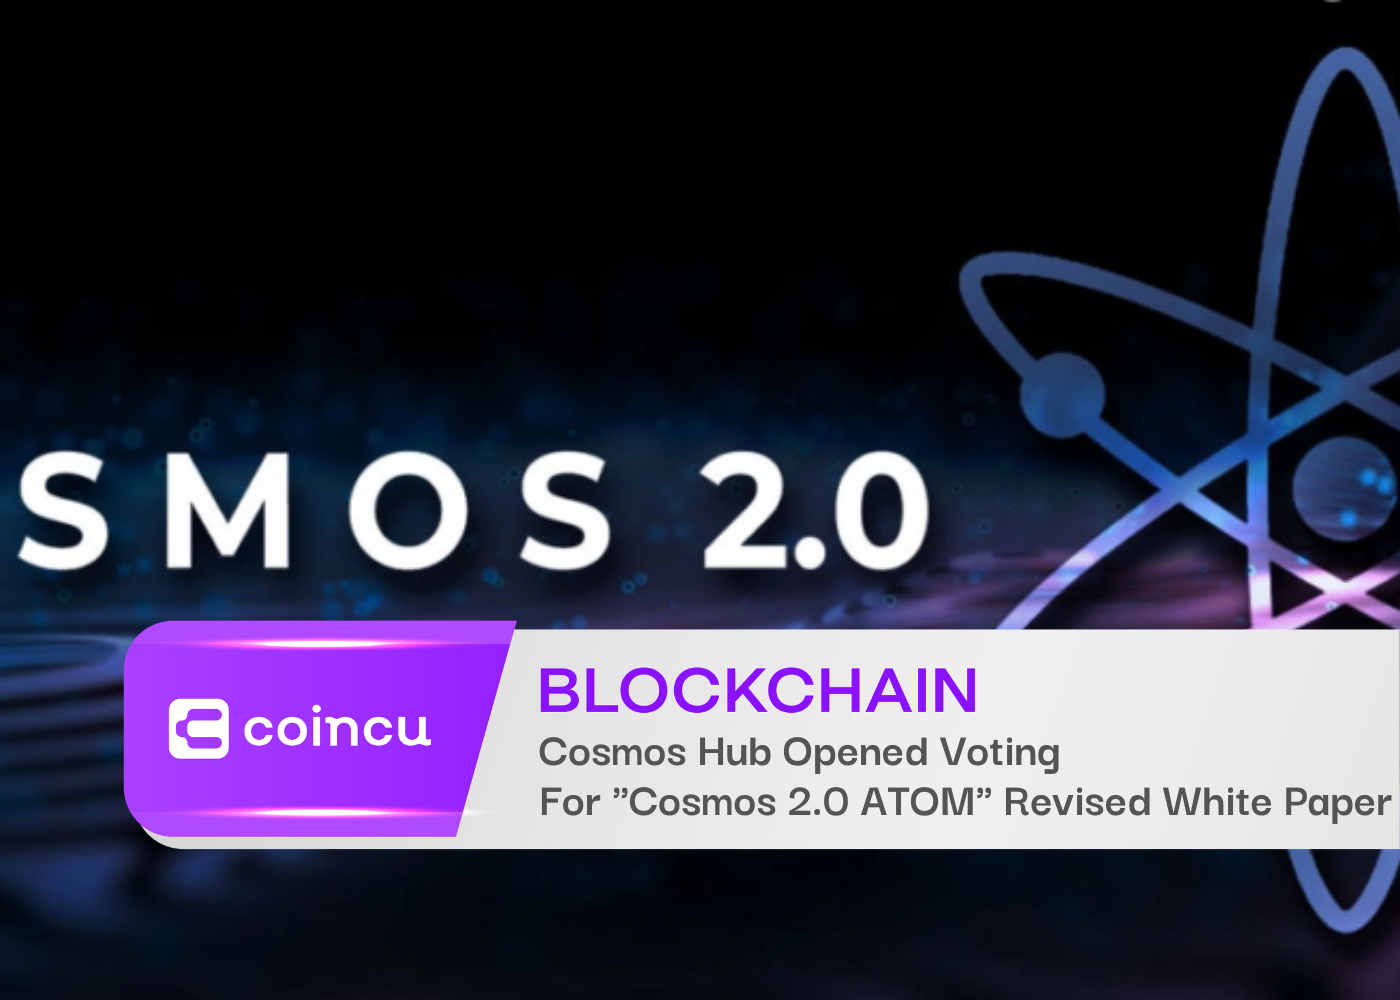 Cosmos Hub Opened Voting For "Cosmos 2.0 ATOM" Revised White Paper